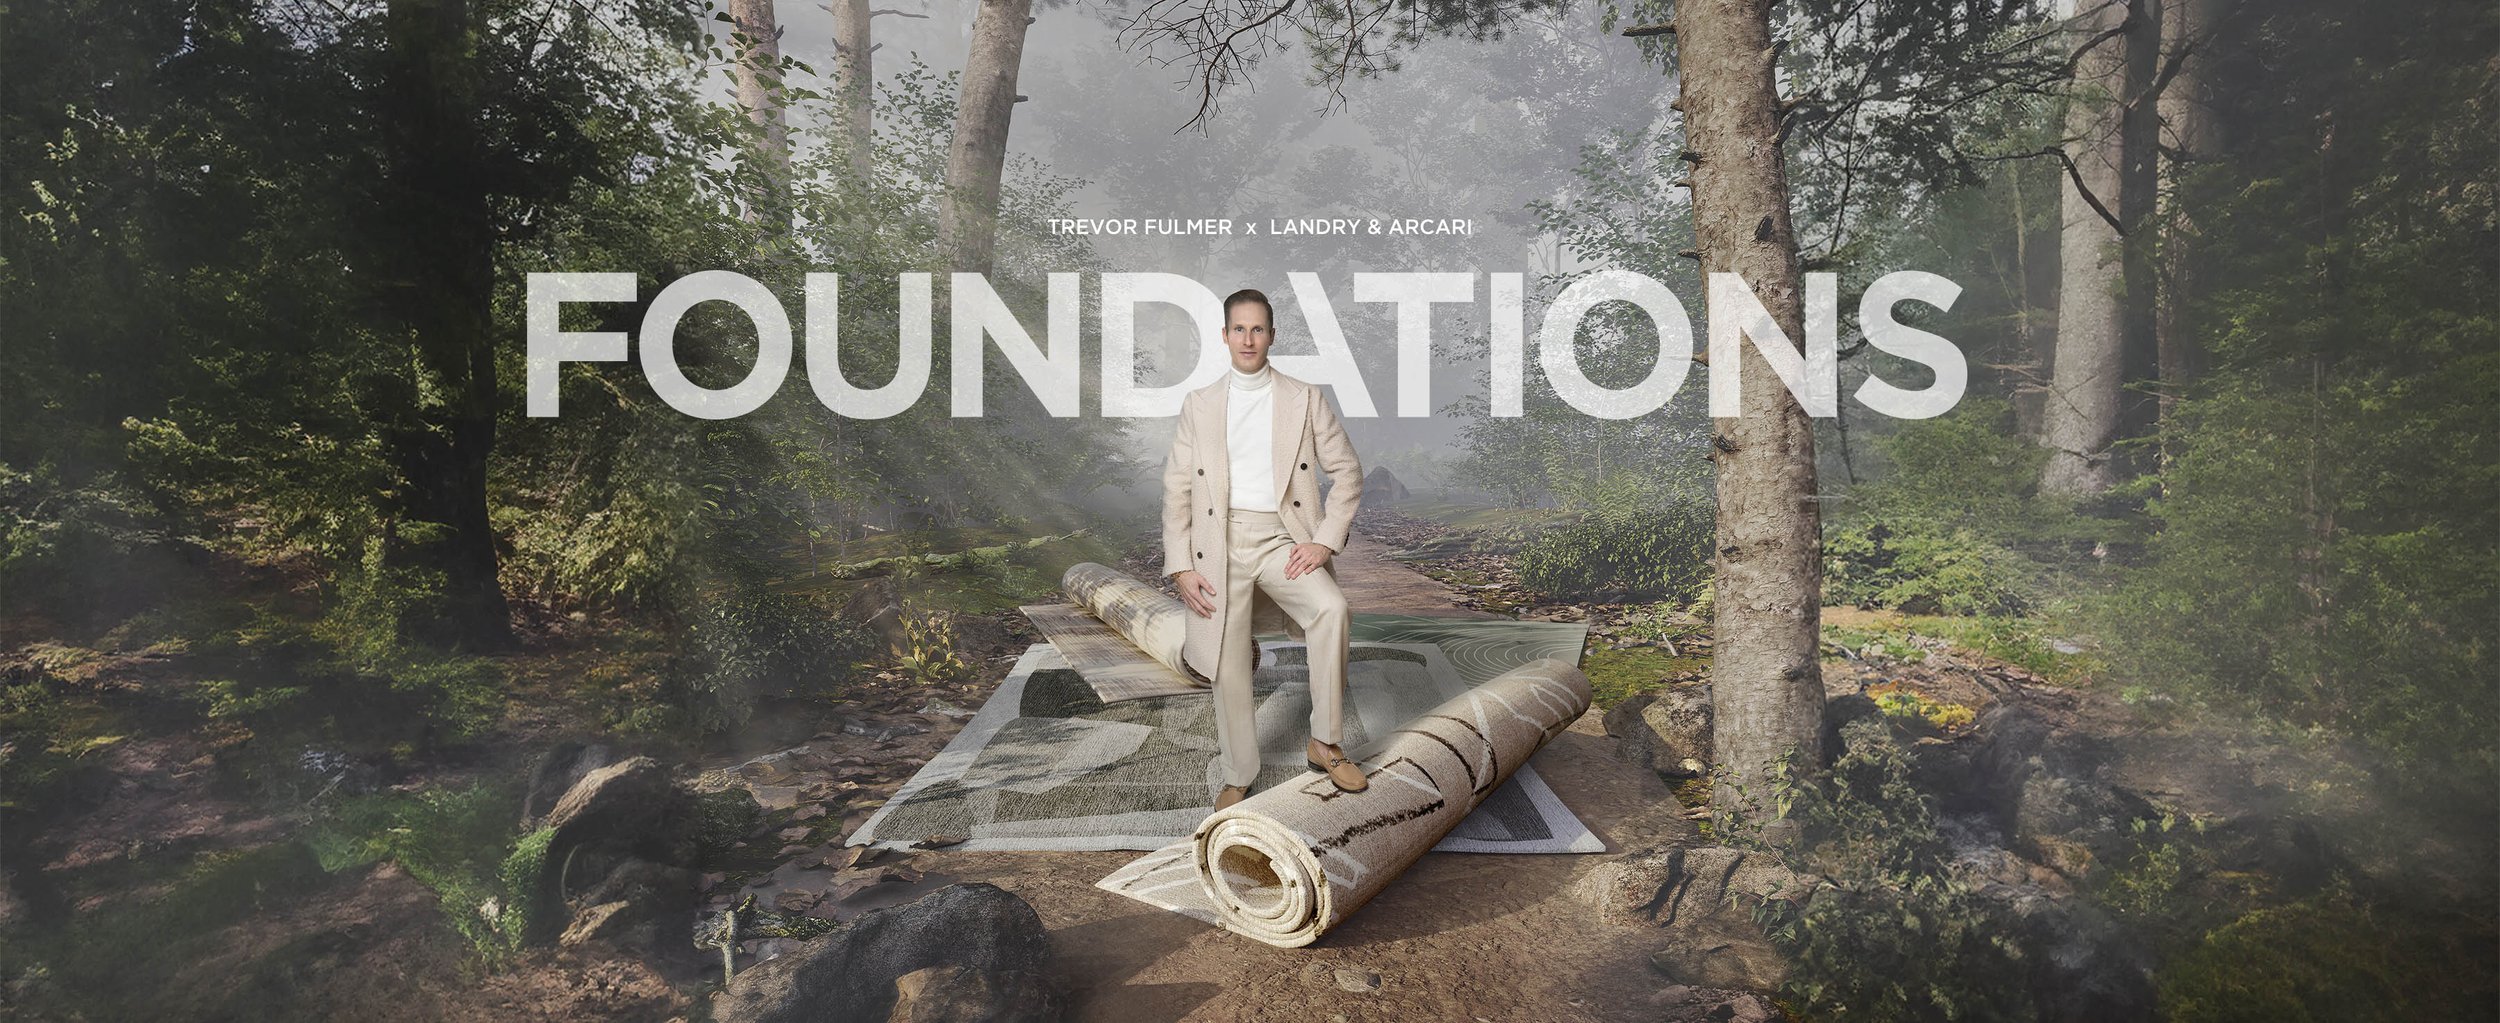 Foundations_Home_Page_Wide_V1.jpg